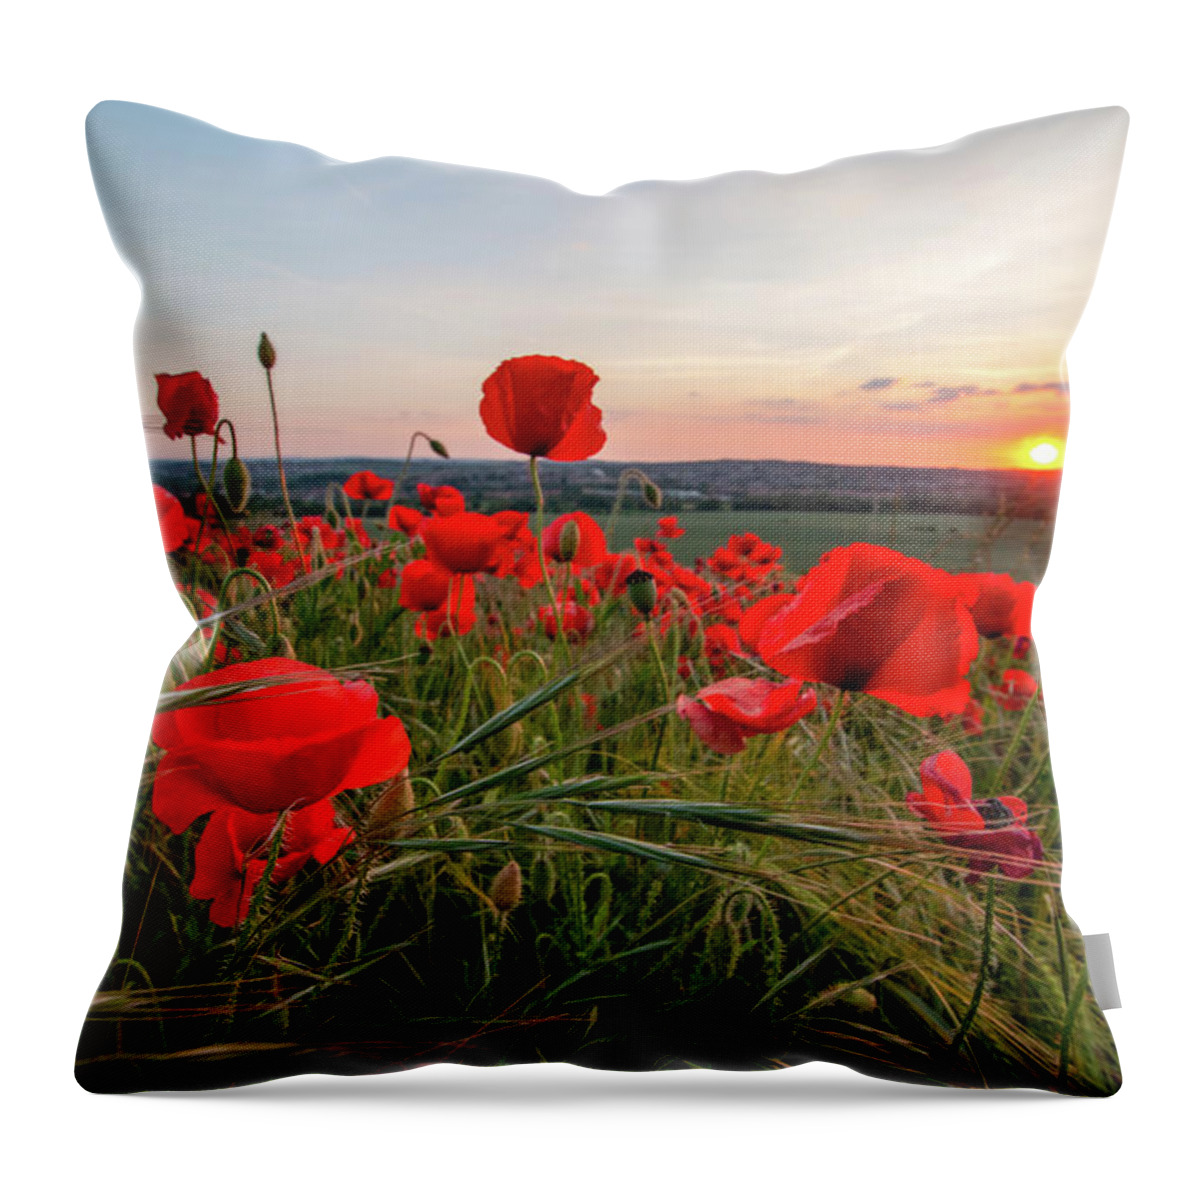 Poppies Throw Pillow featuring the photograph Poppy Field Sunset by Airpower Art